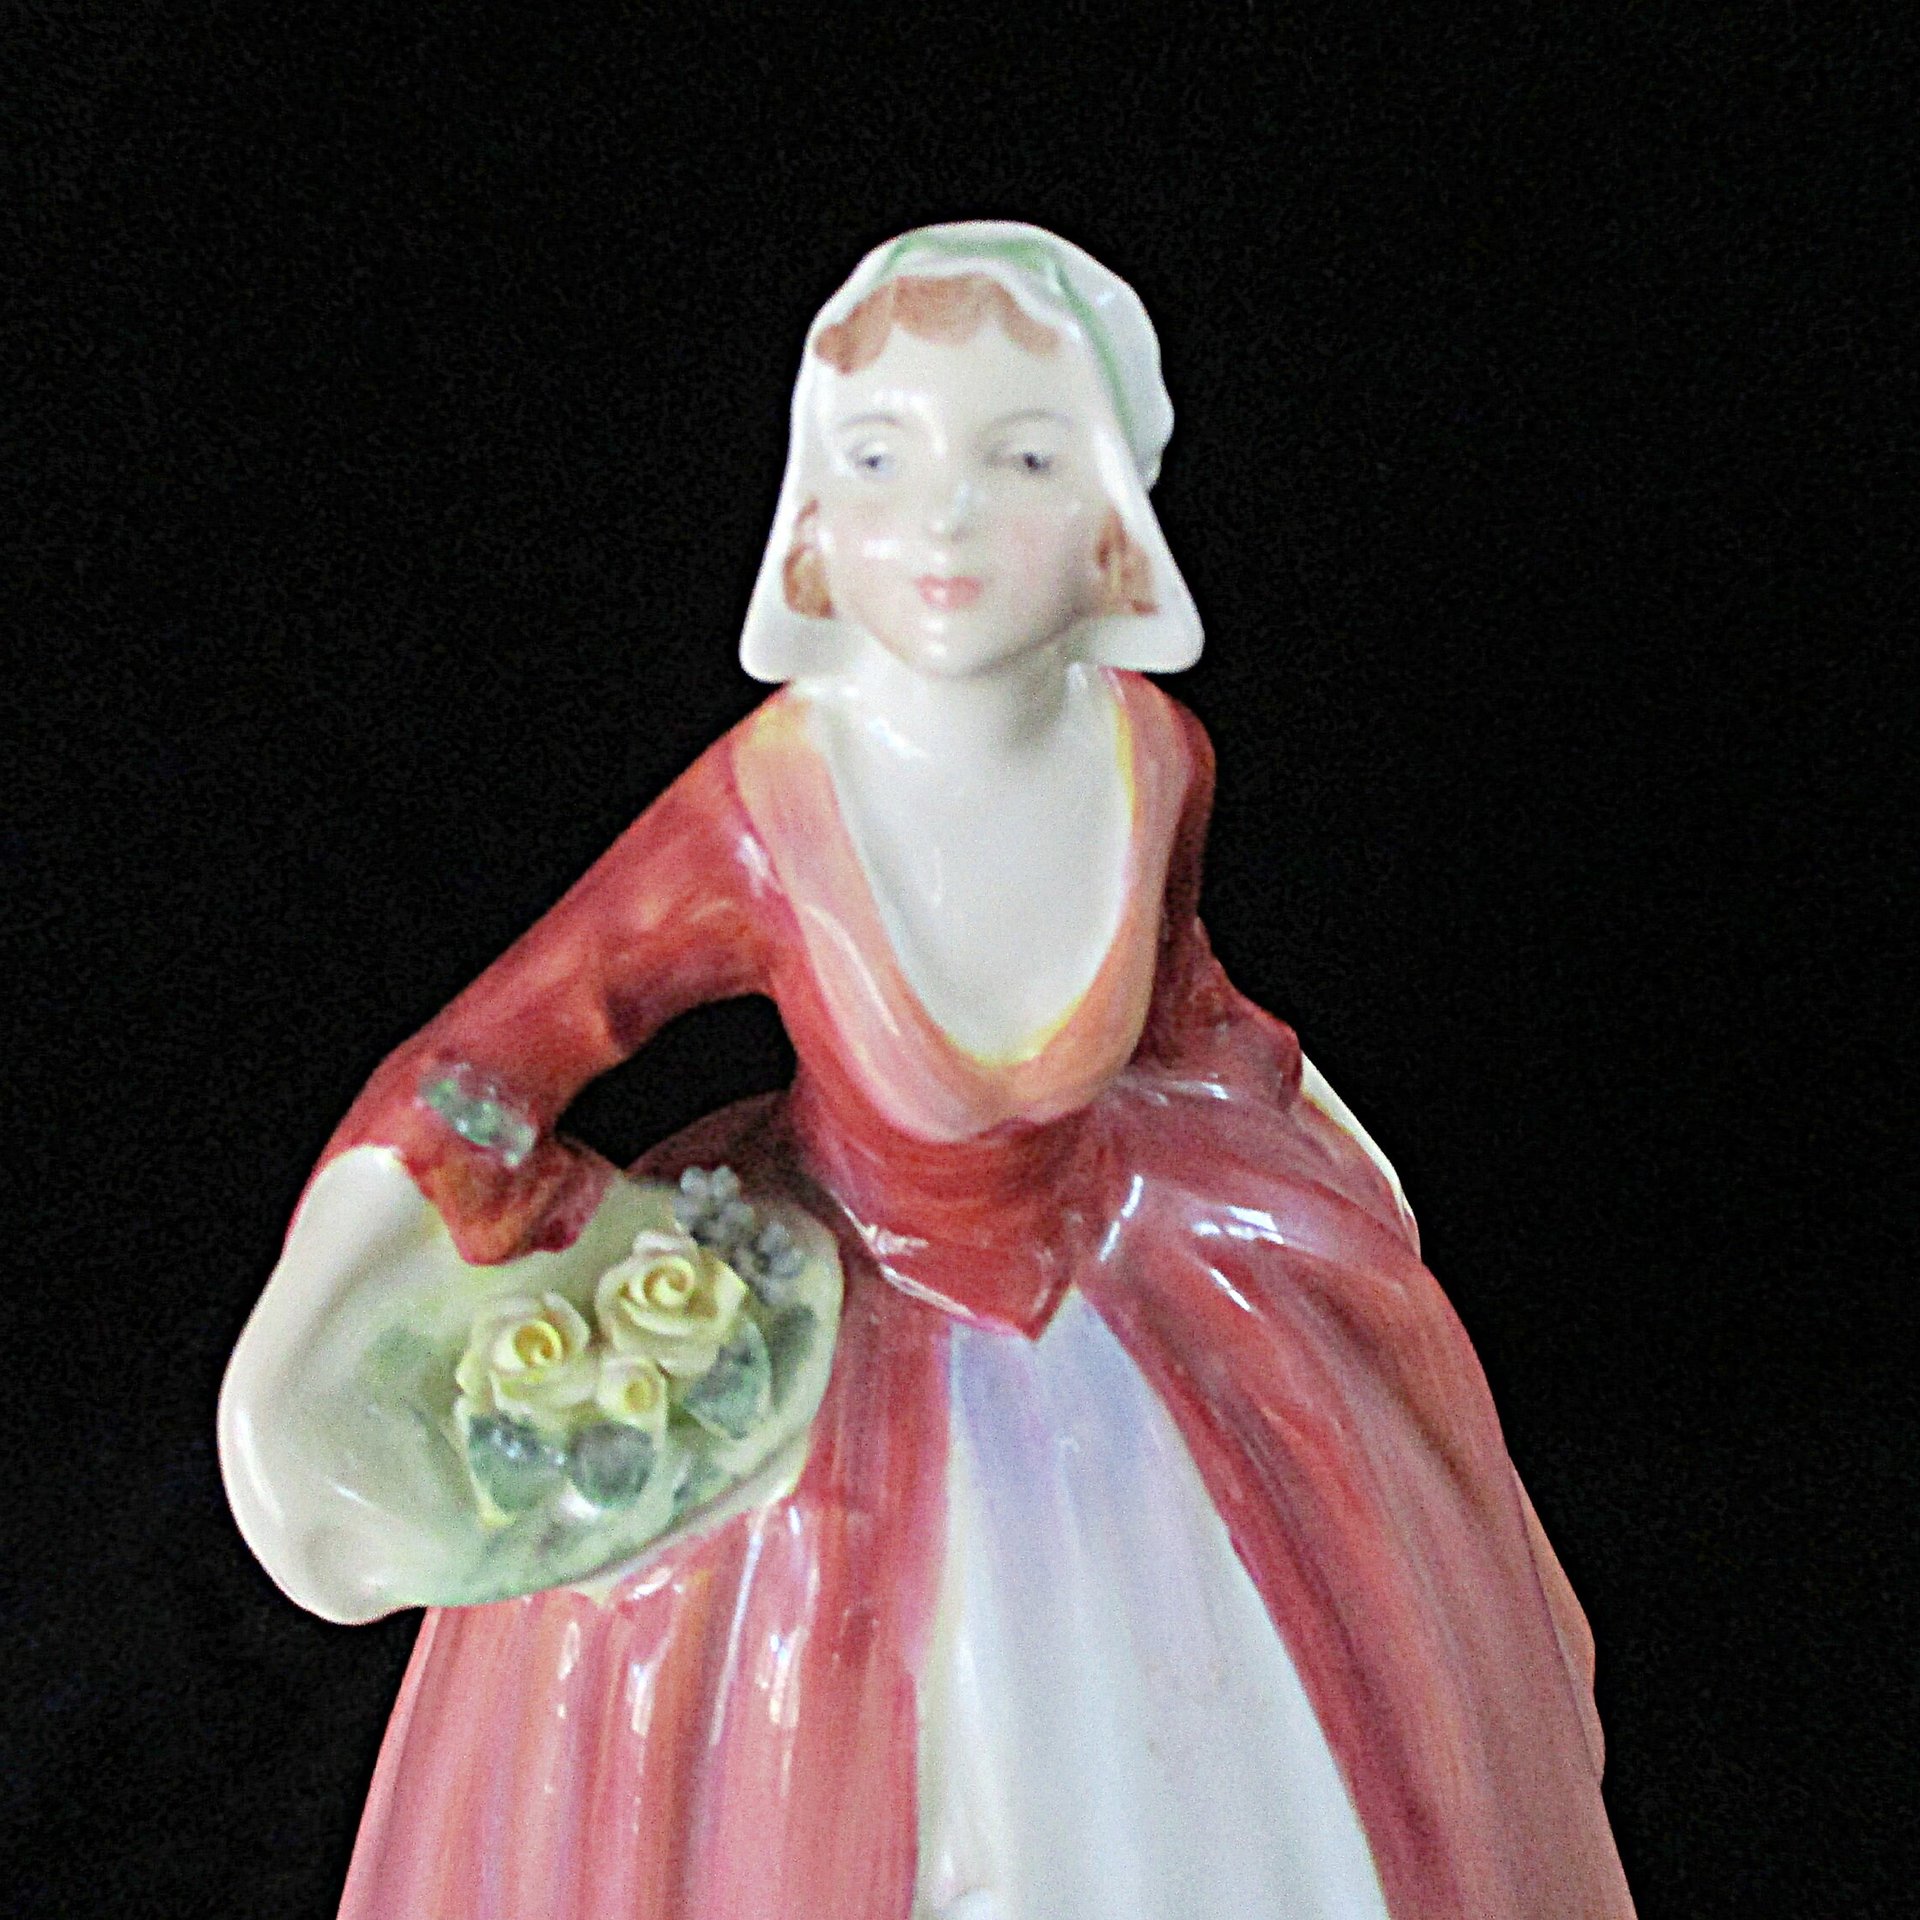 Royal Doulton Figurine, Janet, Retired, Made in England